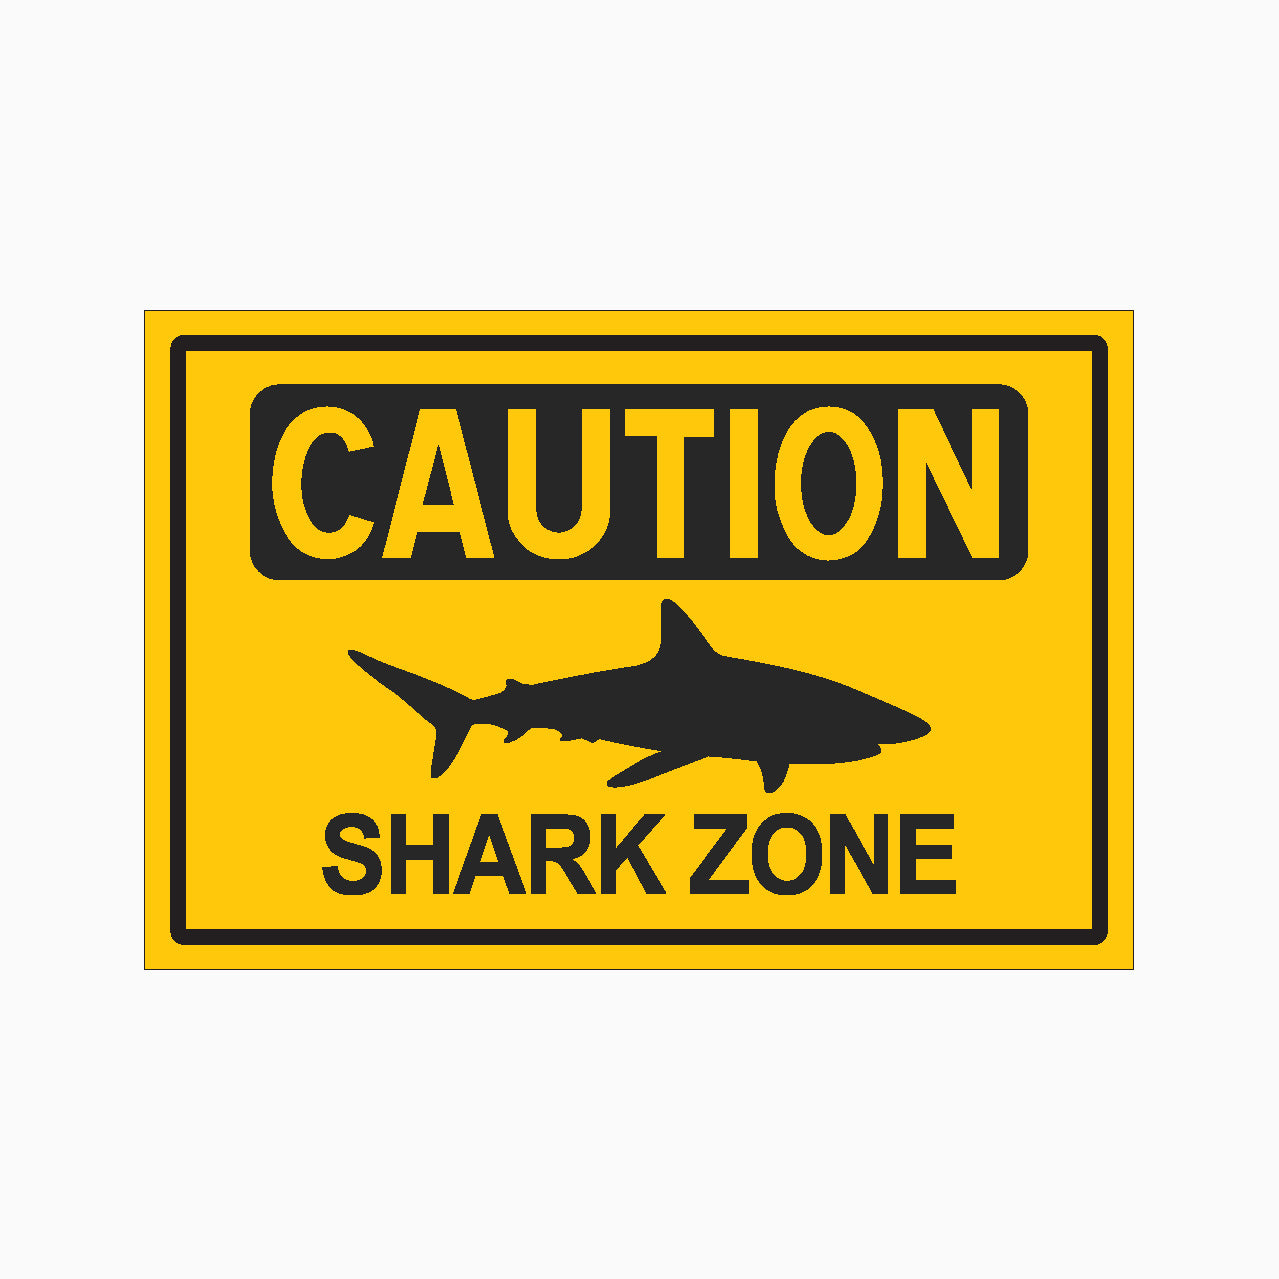 CAUTION SHARK ZONE SIGN – Get signs